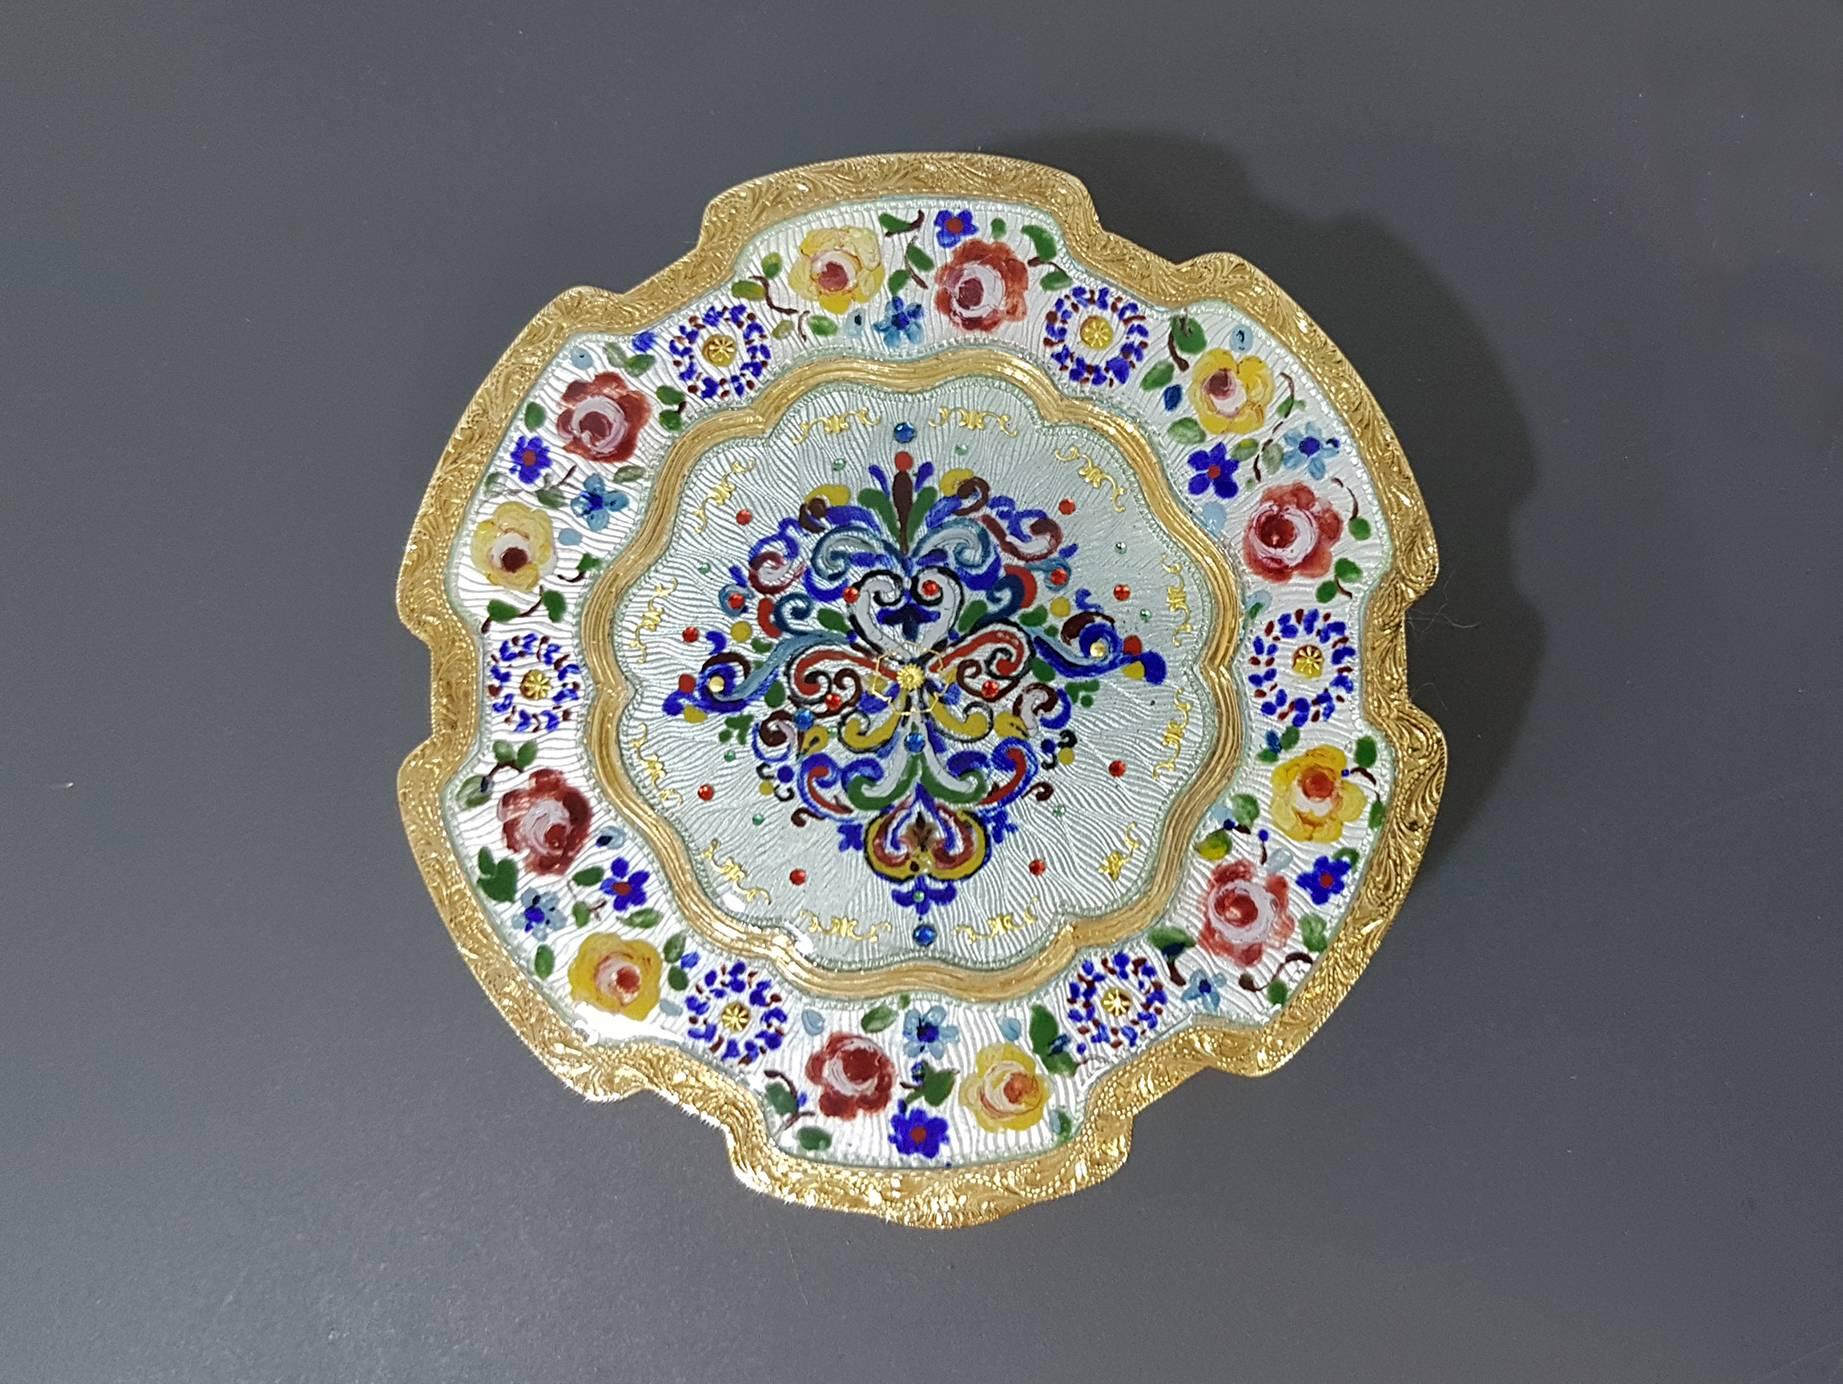 Round shaped box Made in Italy Silver Gilted 925/1000 with translucent enamels on guilloche with hand painted floral miniatures and gold paillons

The Miniatures are hand-painted on a usually white homogeneous enamel base. The same colored glazes